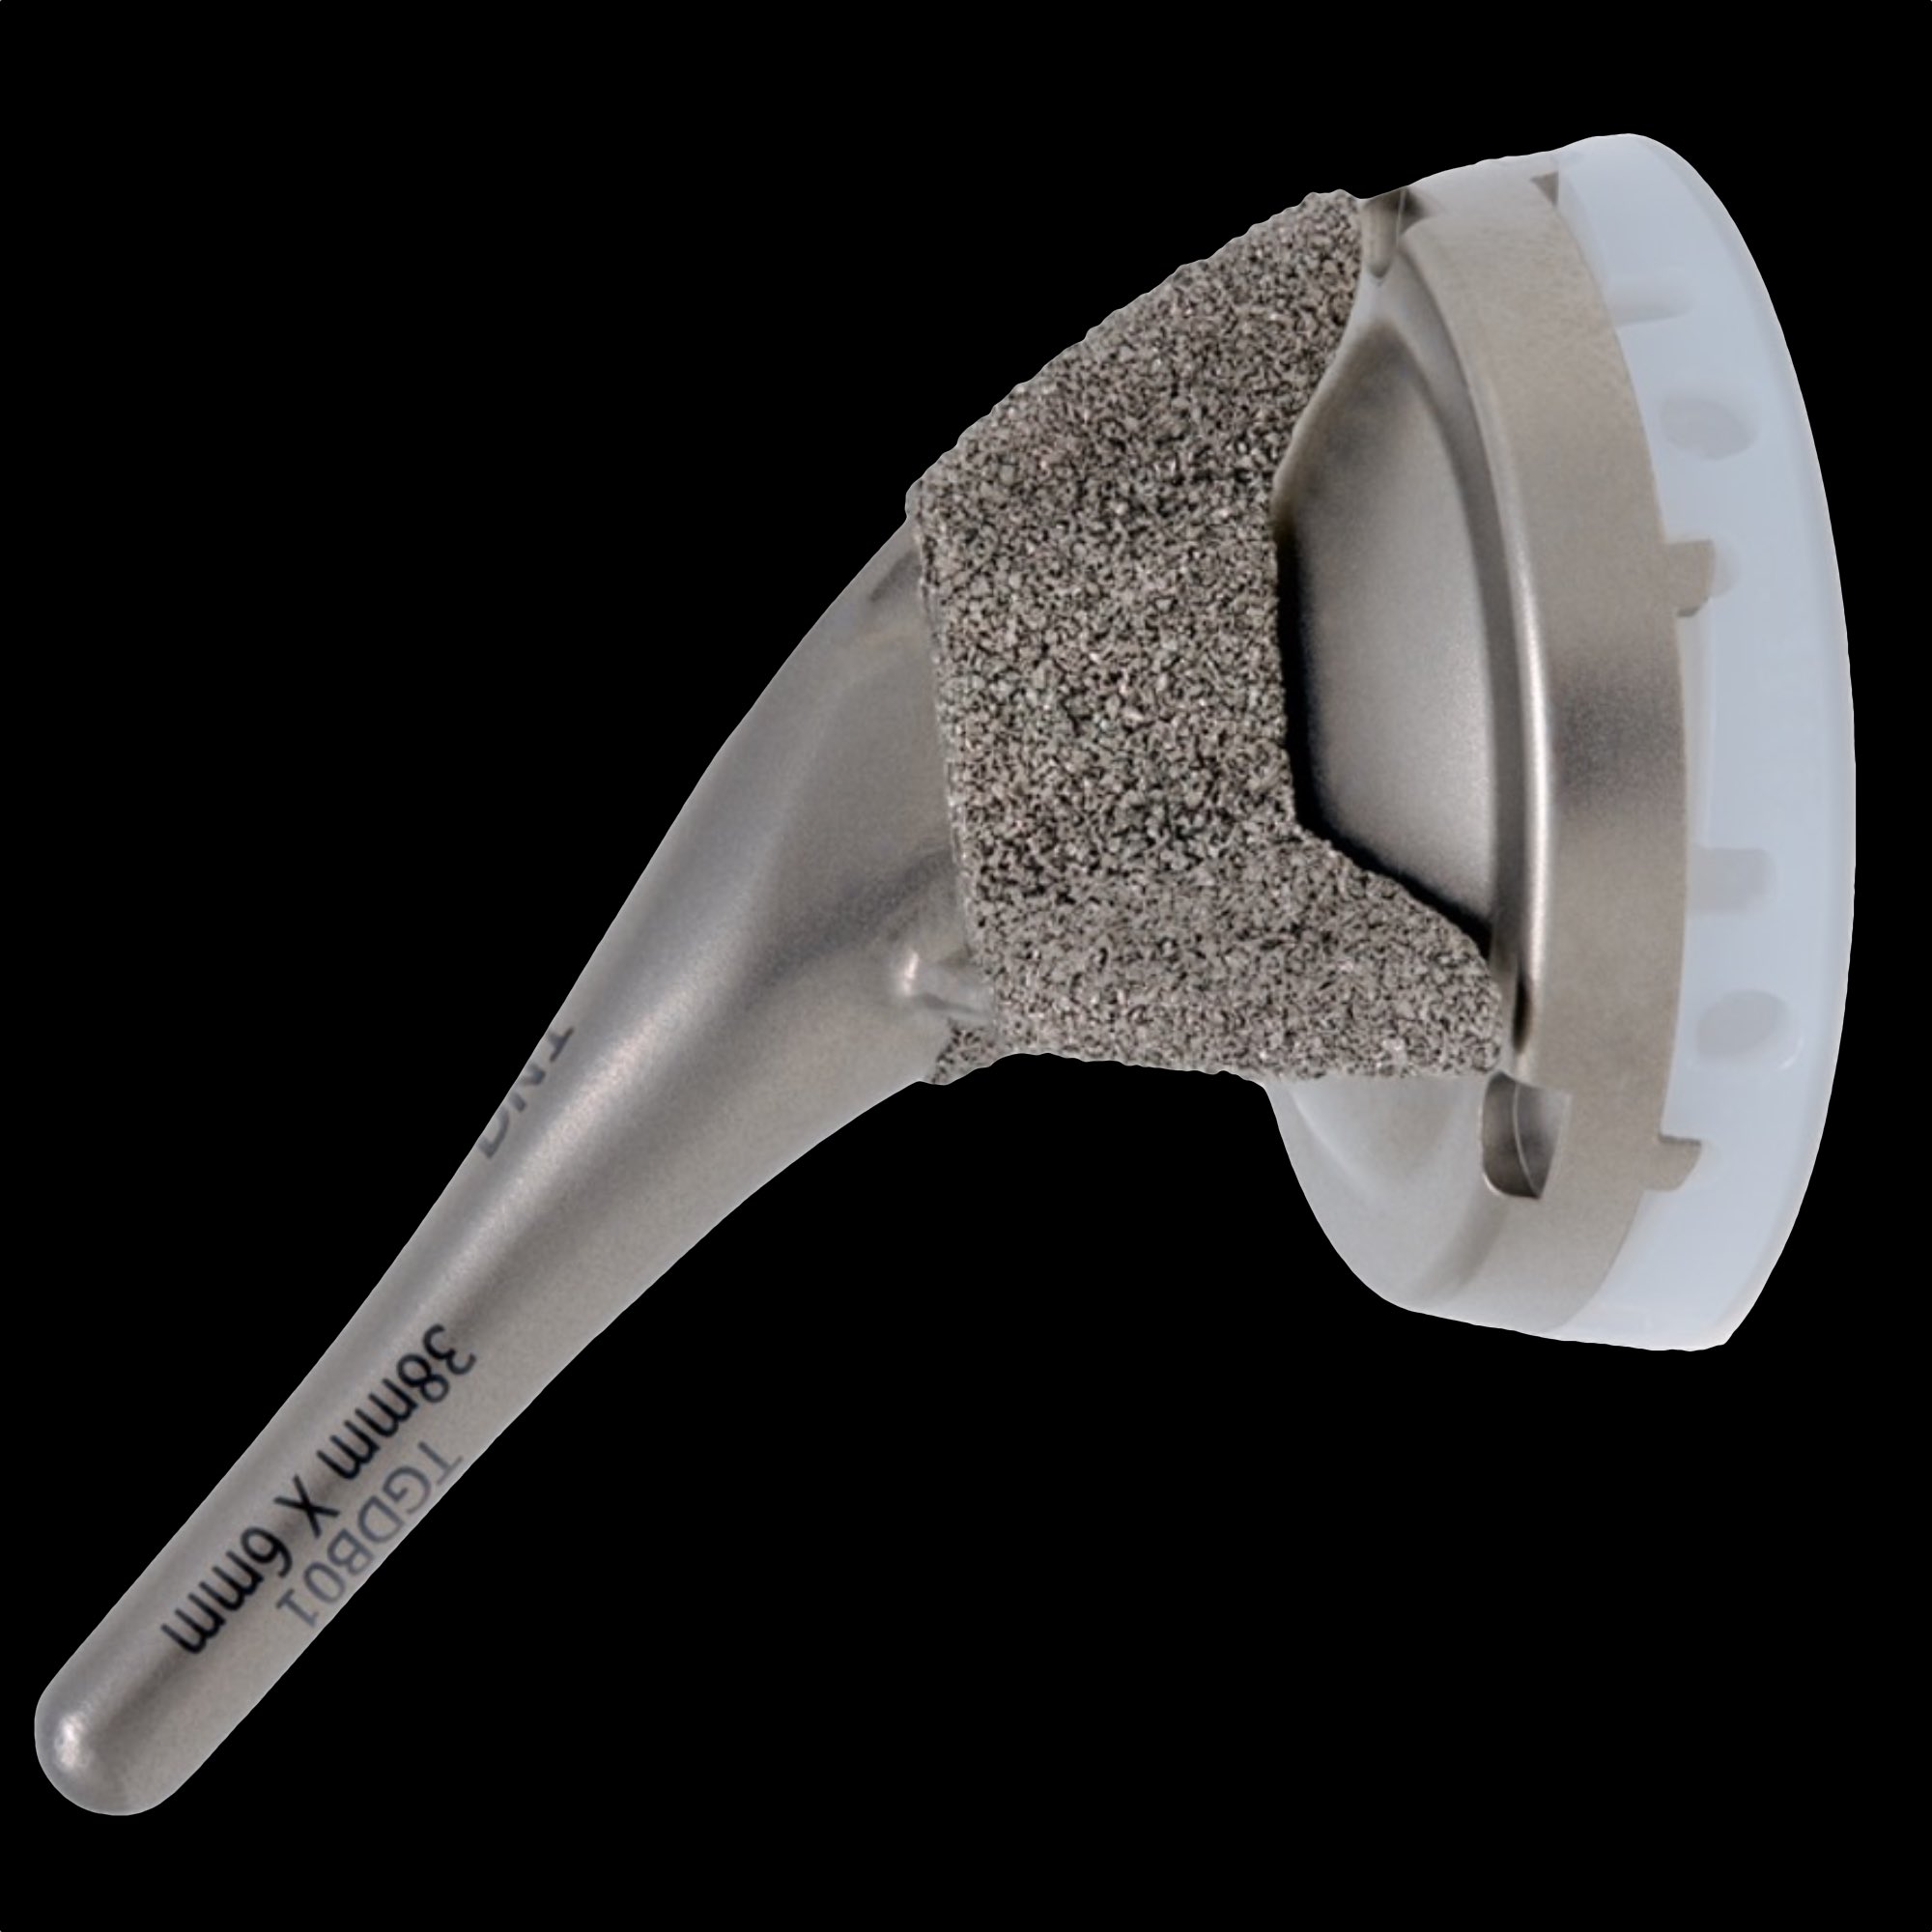 The humeral components of the InSet™ reverse shoulder implant